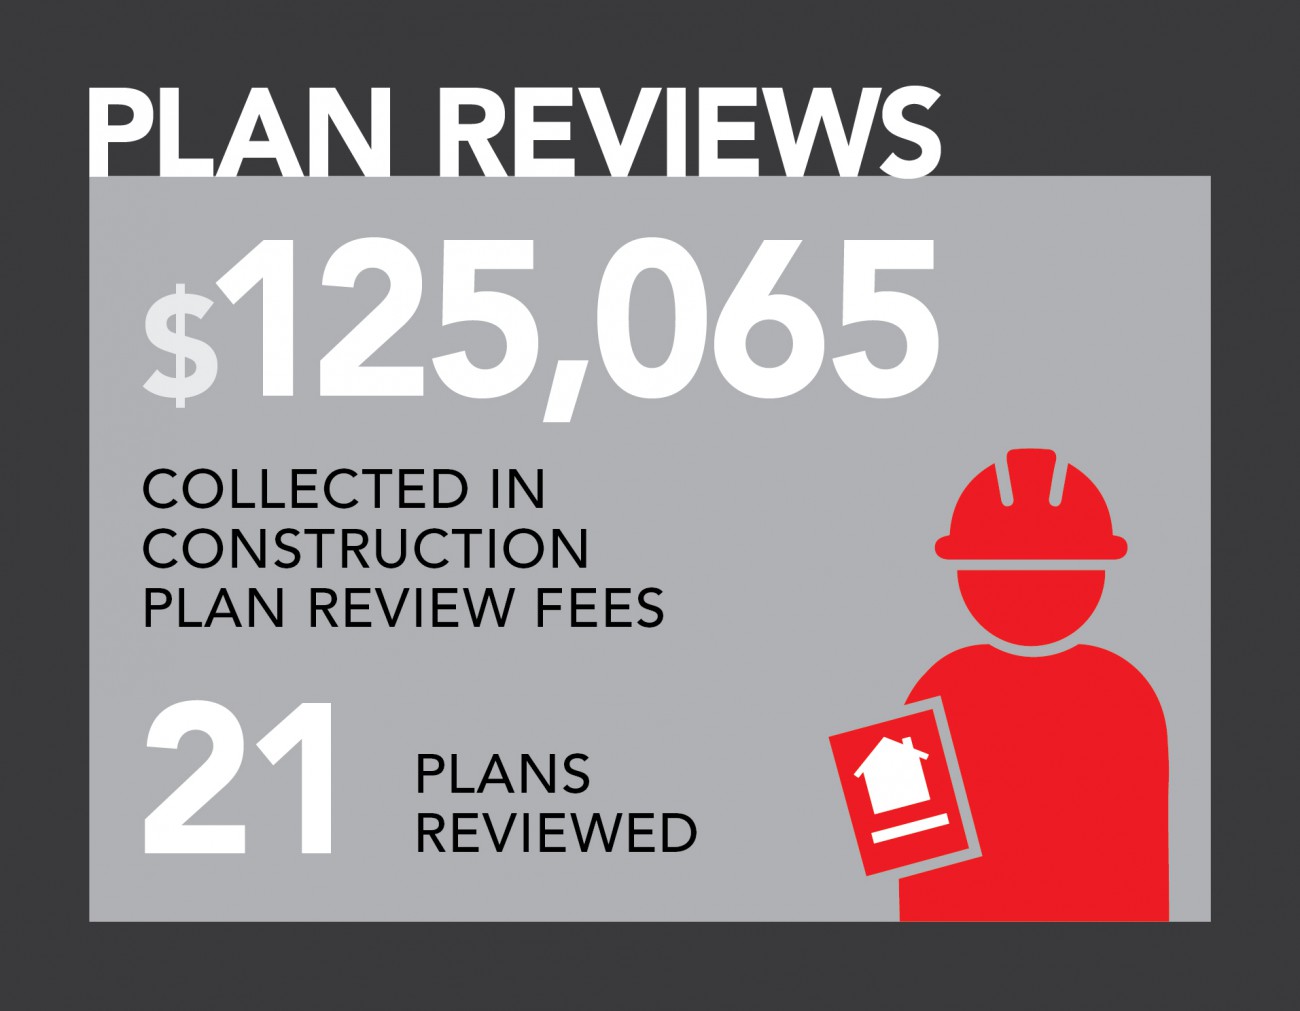 Infographic: 21 plans reviewed; $125,065 collected in construction plan reviews.